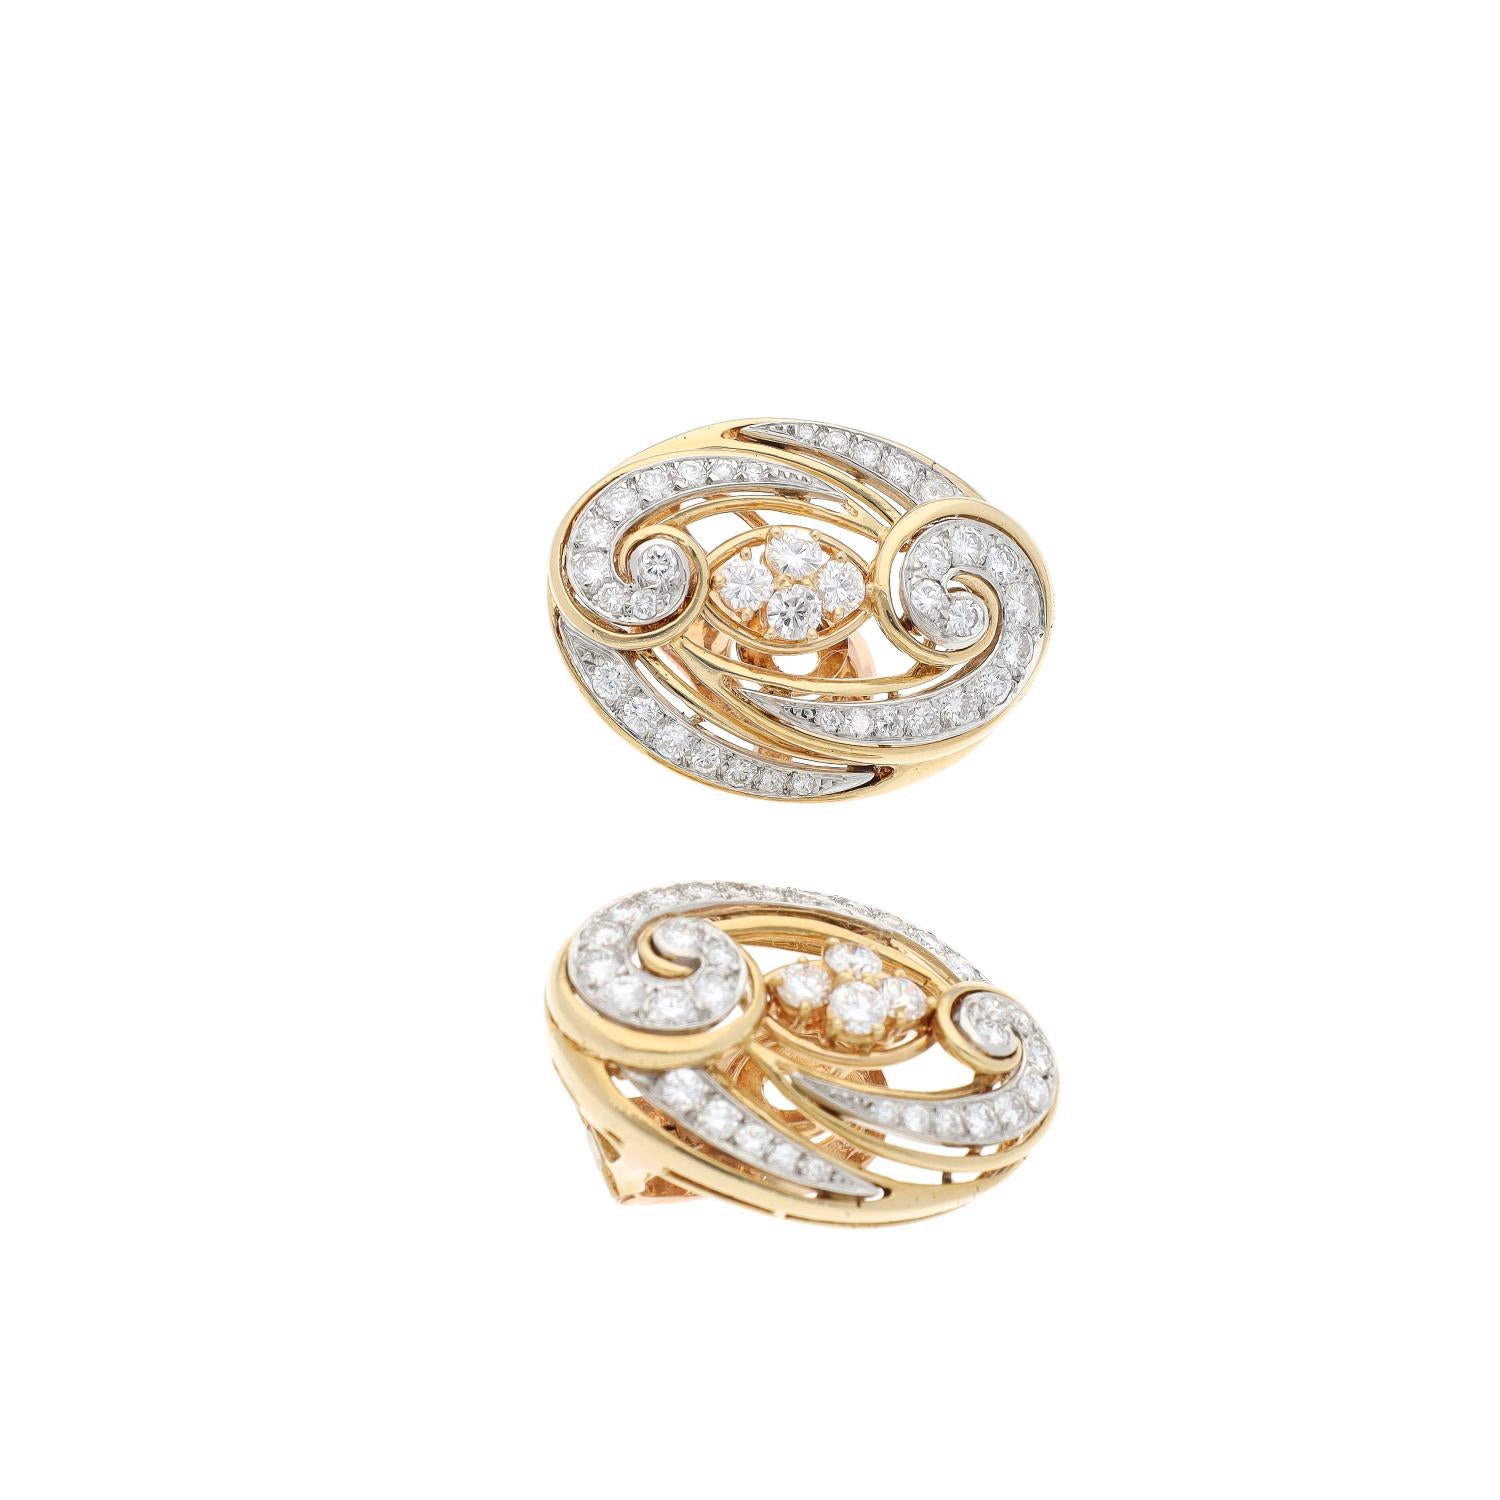 Van Cleef & Arpels Paris Vintage Collection Diamond Gold Arabesque Earclips

From our Signed Vintage Jewels Collection a pair of diamond gold Arabesque 1970s Van Cleef & Arpels Paris elegant diamond and platinum set 18kt gold earrings made in Paris